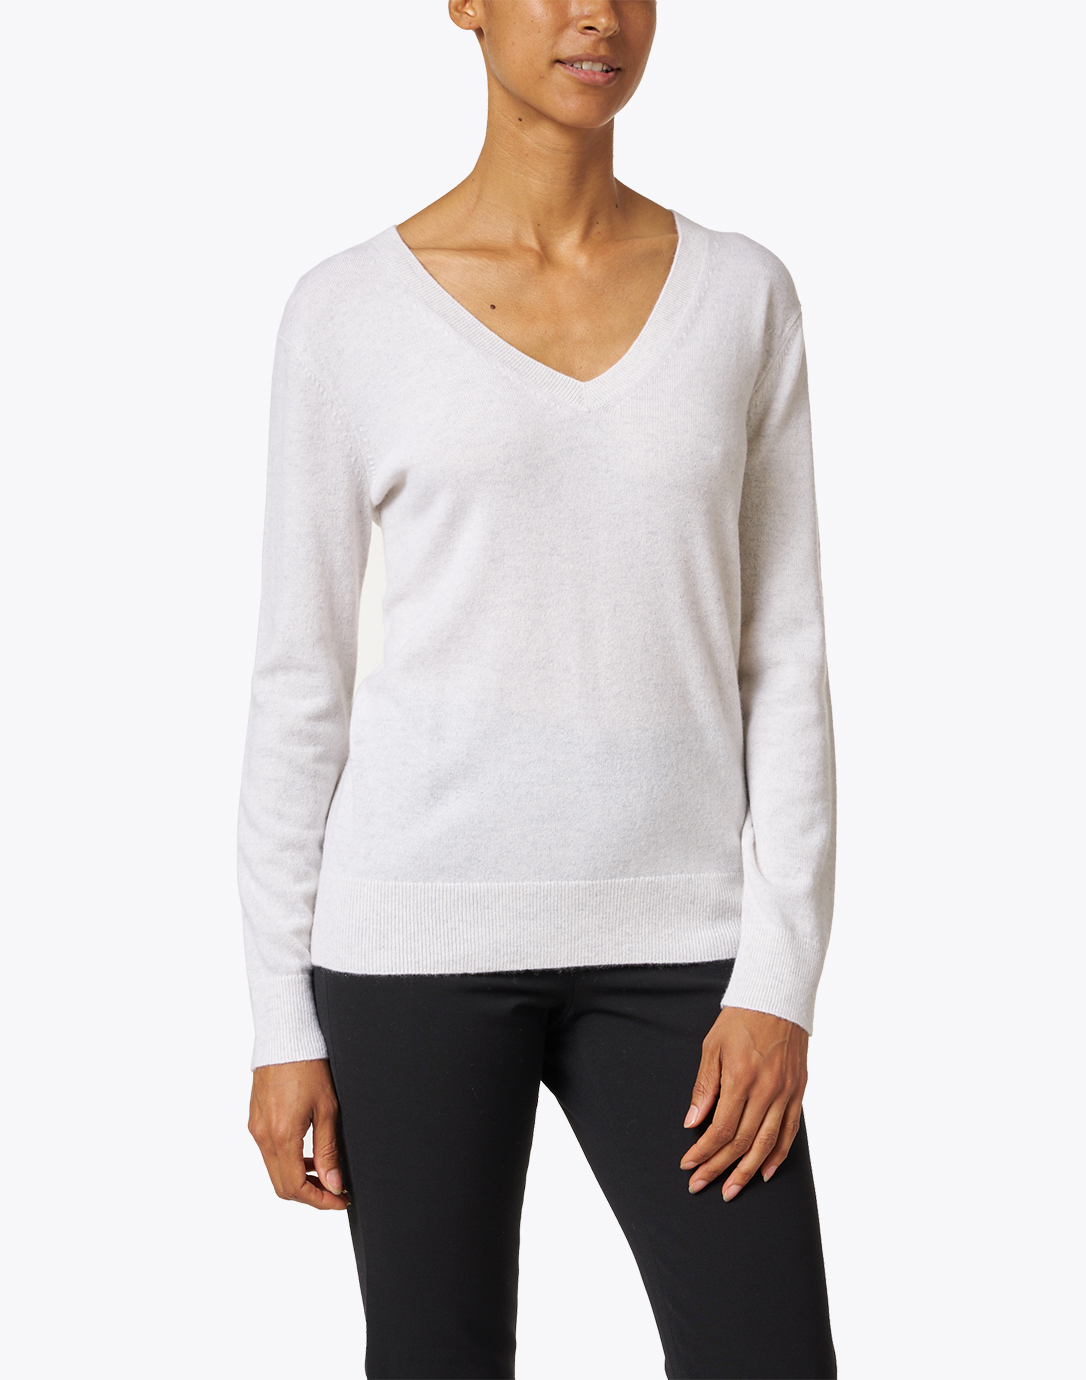 Weekend Off White Cashmere Sweater Vince